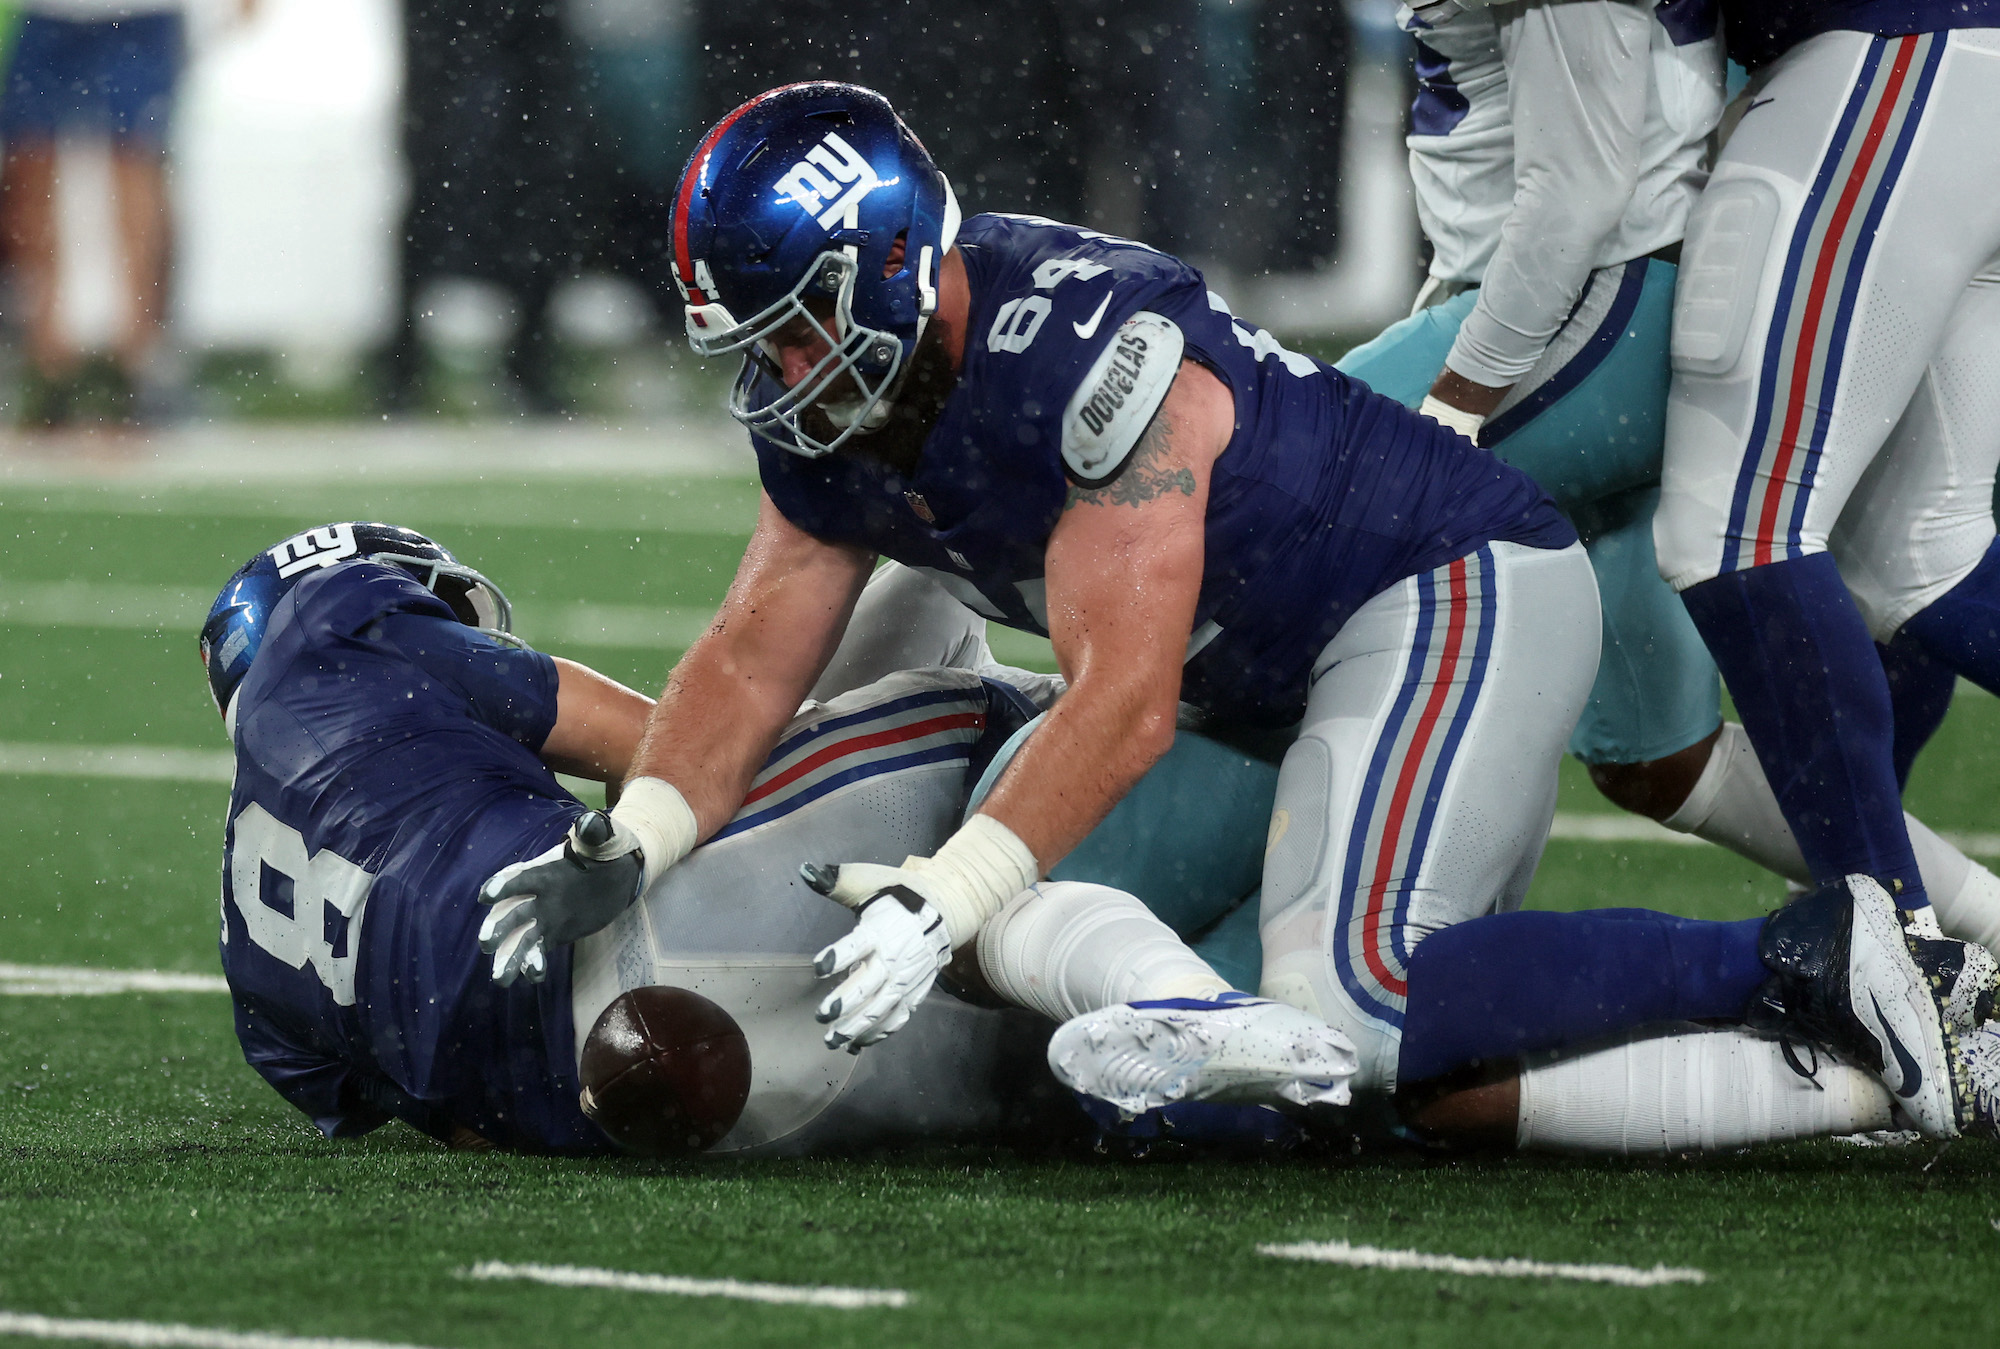 EAST RUTHERFORD, NEW JERSEY - SEPTEMBER 10: Mark Glowinski #64 of the New York Giants recovers a fumble during the fourth quarter against the Dallas Cowboys at MetLife Stadium on September 10, 2023 in East Rutherford, New Jersey. (Photo by Tim Nwachukwu/Getty Images)